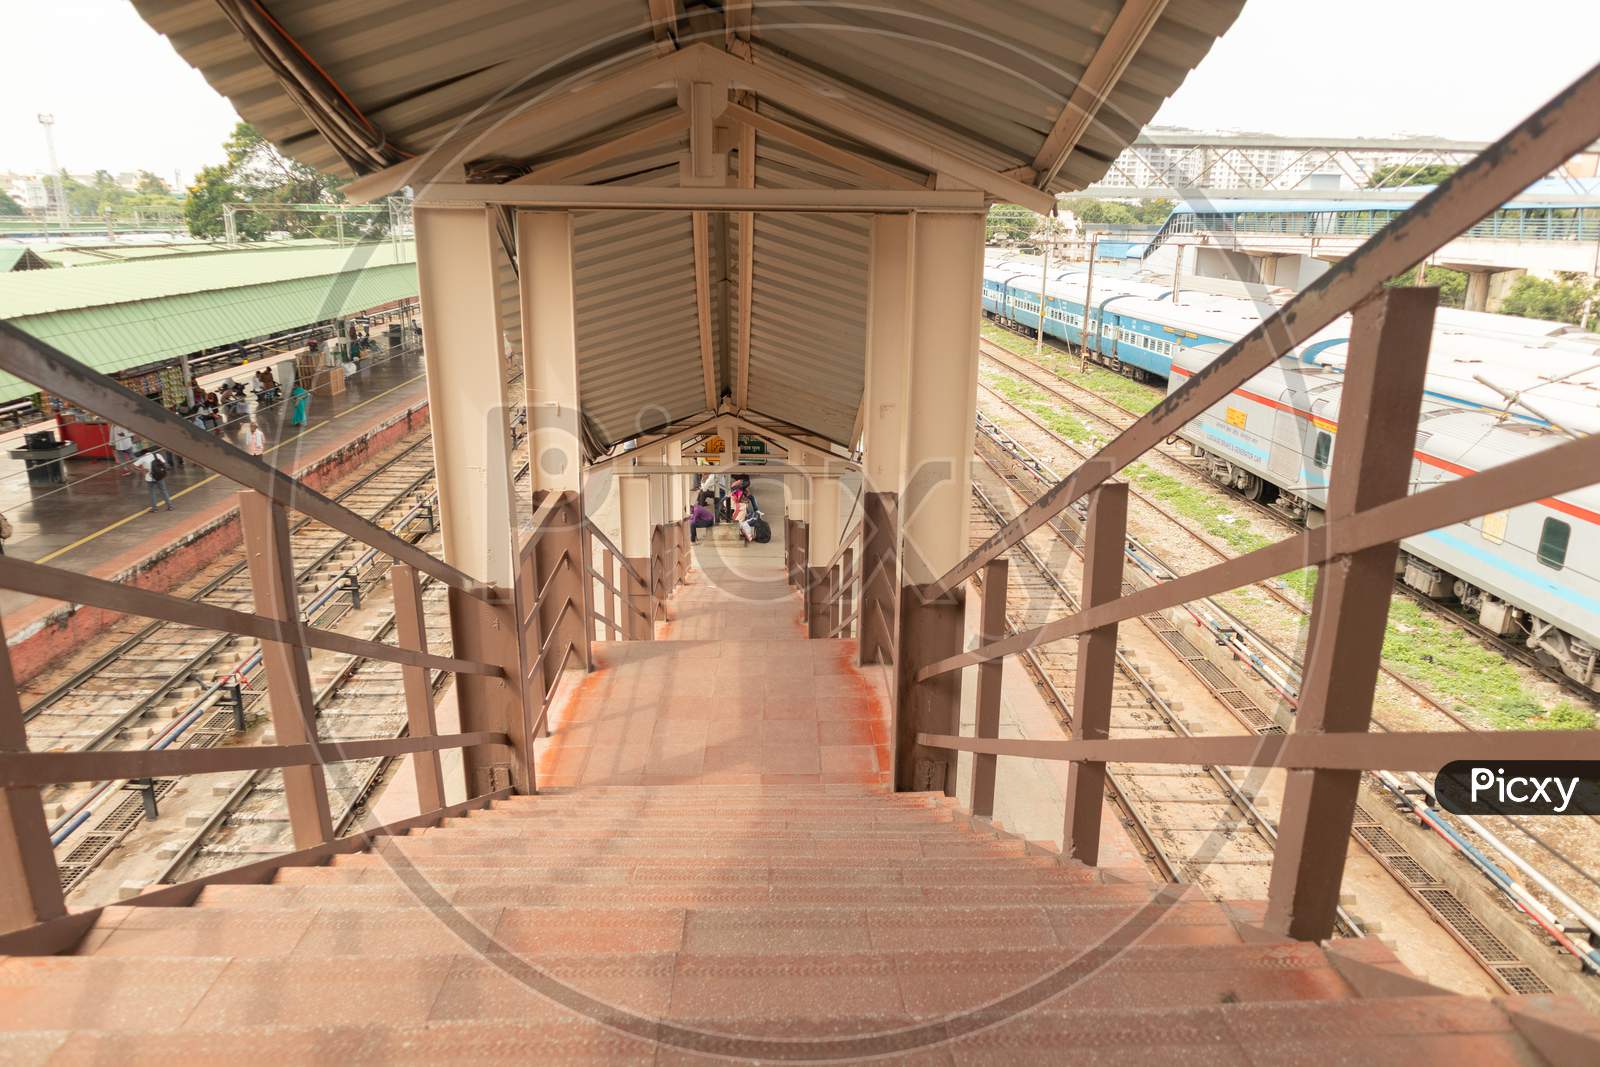 Bangalore India June 3, 2019 : Old Retro Staircase In Railway Station.